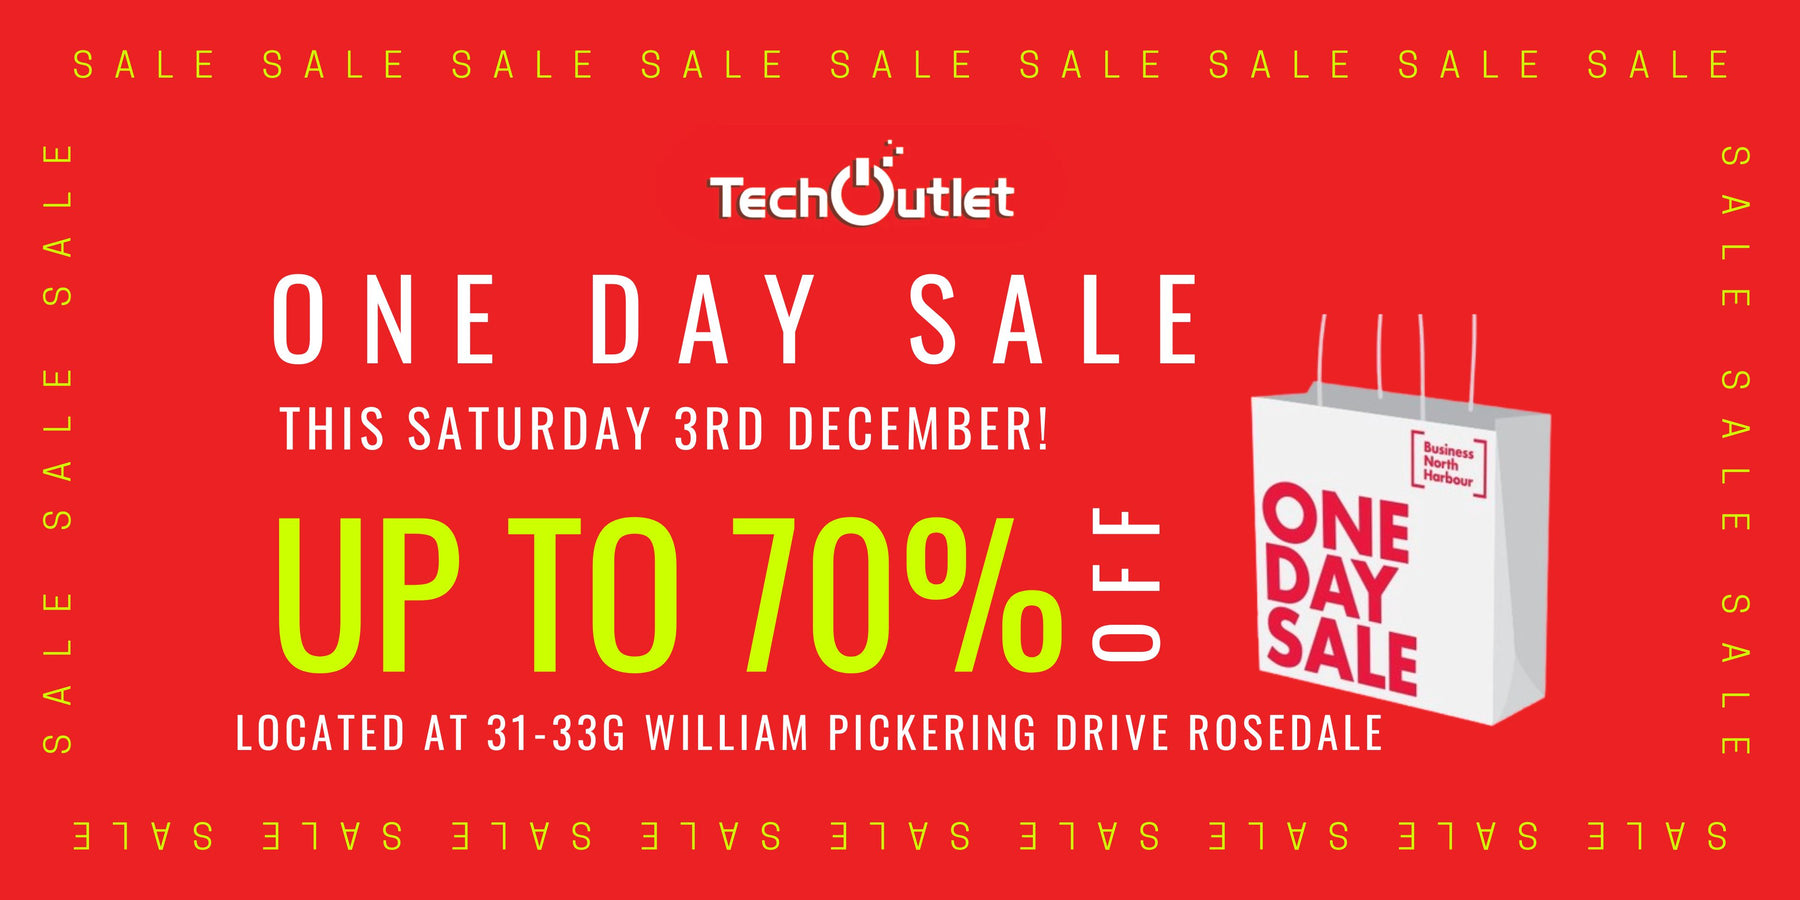 Annual ONE DAY SALE - On this Saturday!